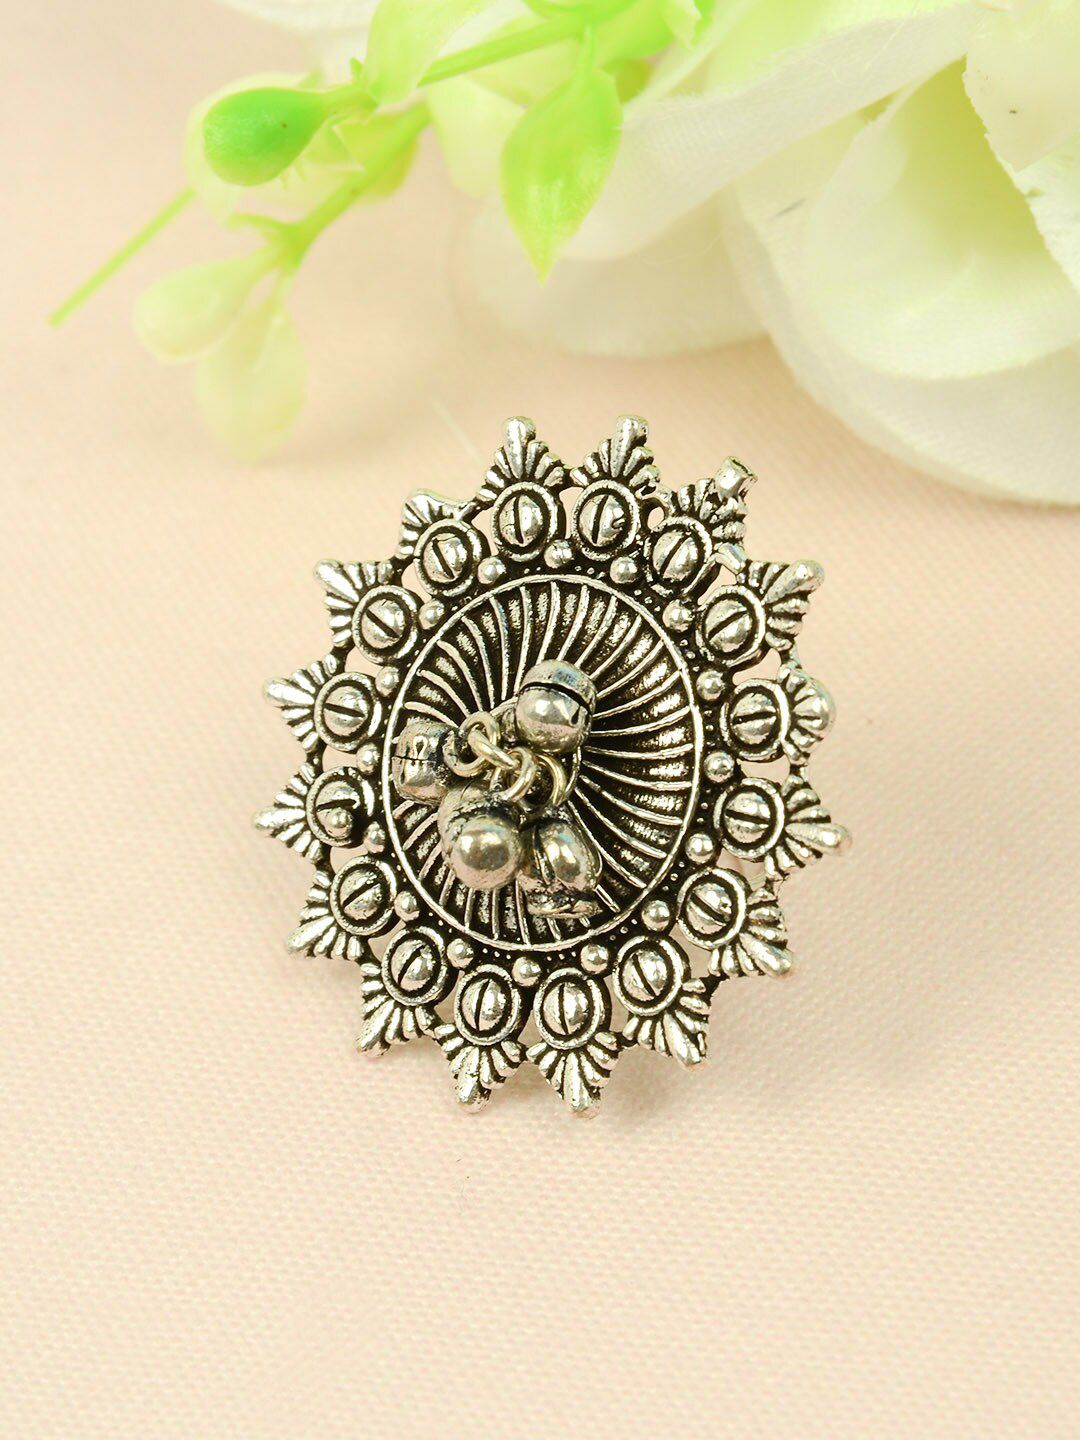 Urmika Silver-Toned Oxidized Traditional Ghungroo Adjustable Finger Ring Price in India